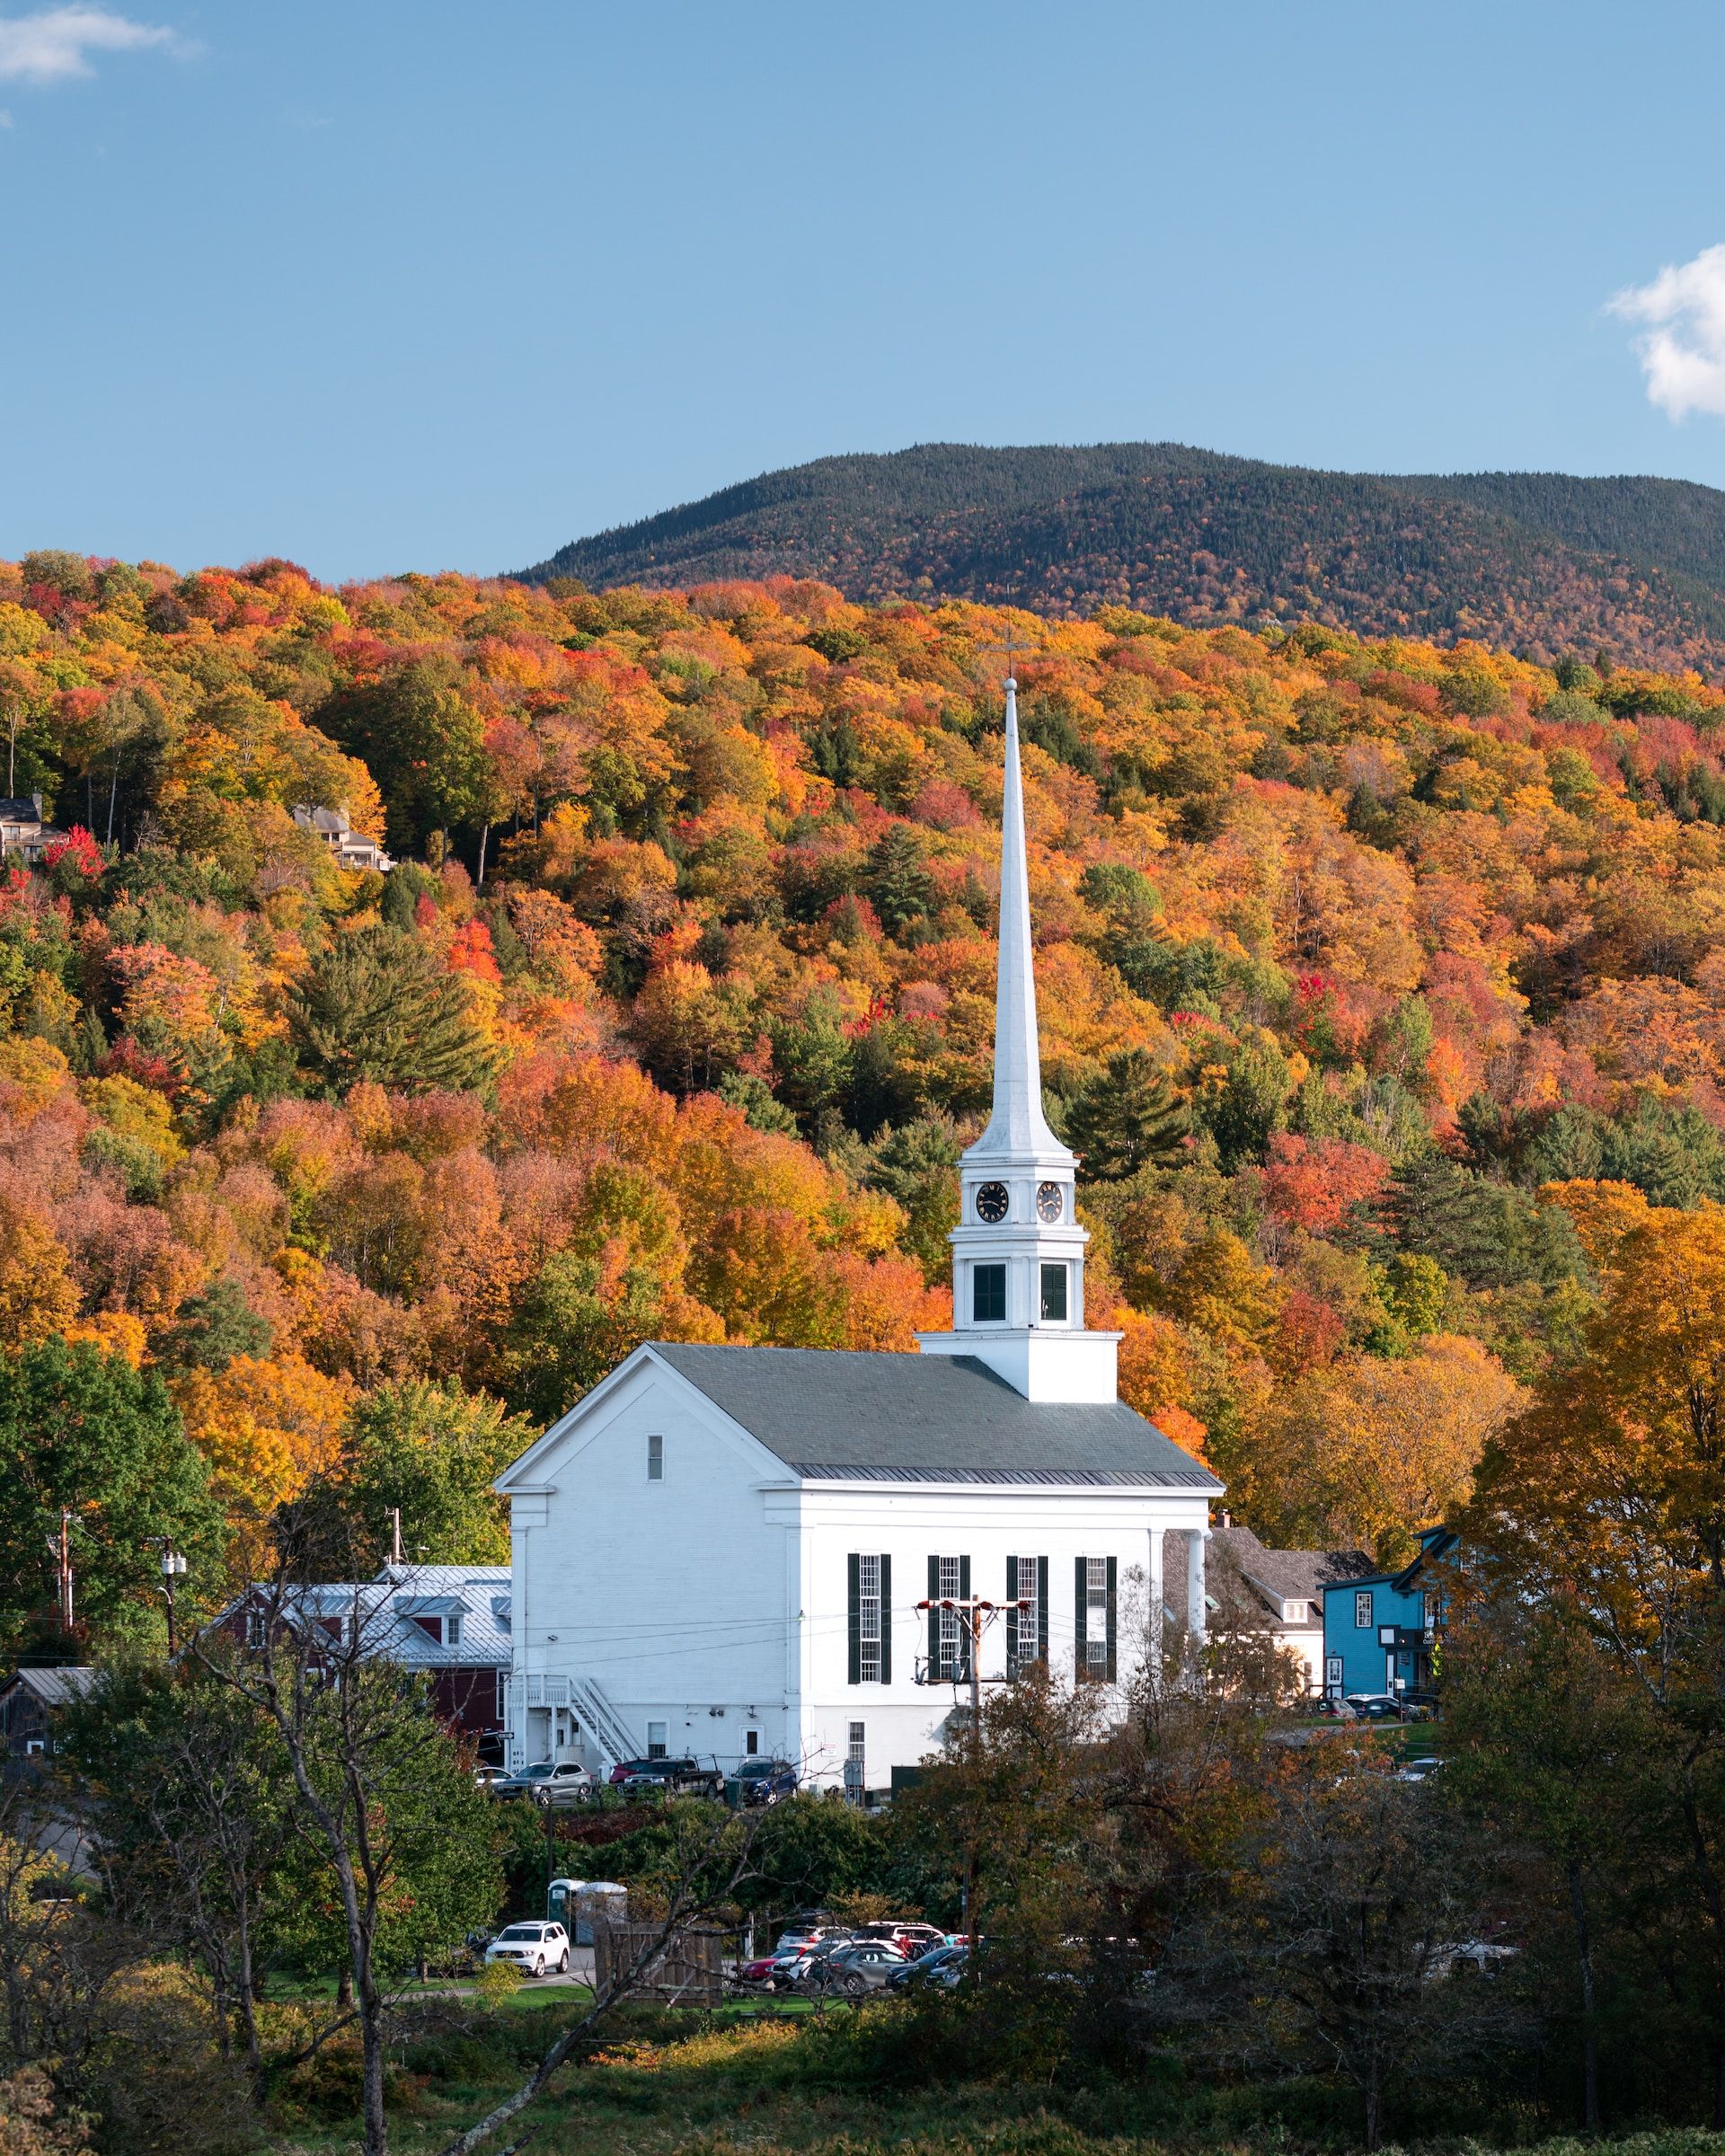 View of Stowe, one of the best places in Vermont to catch fall foliage in all its splendor